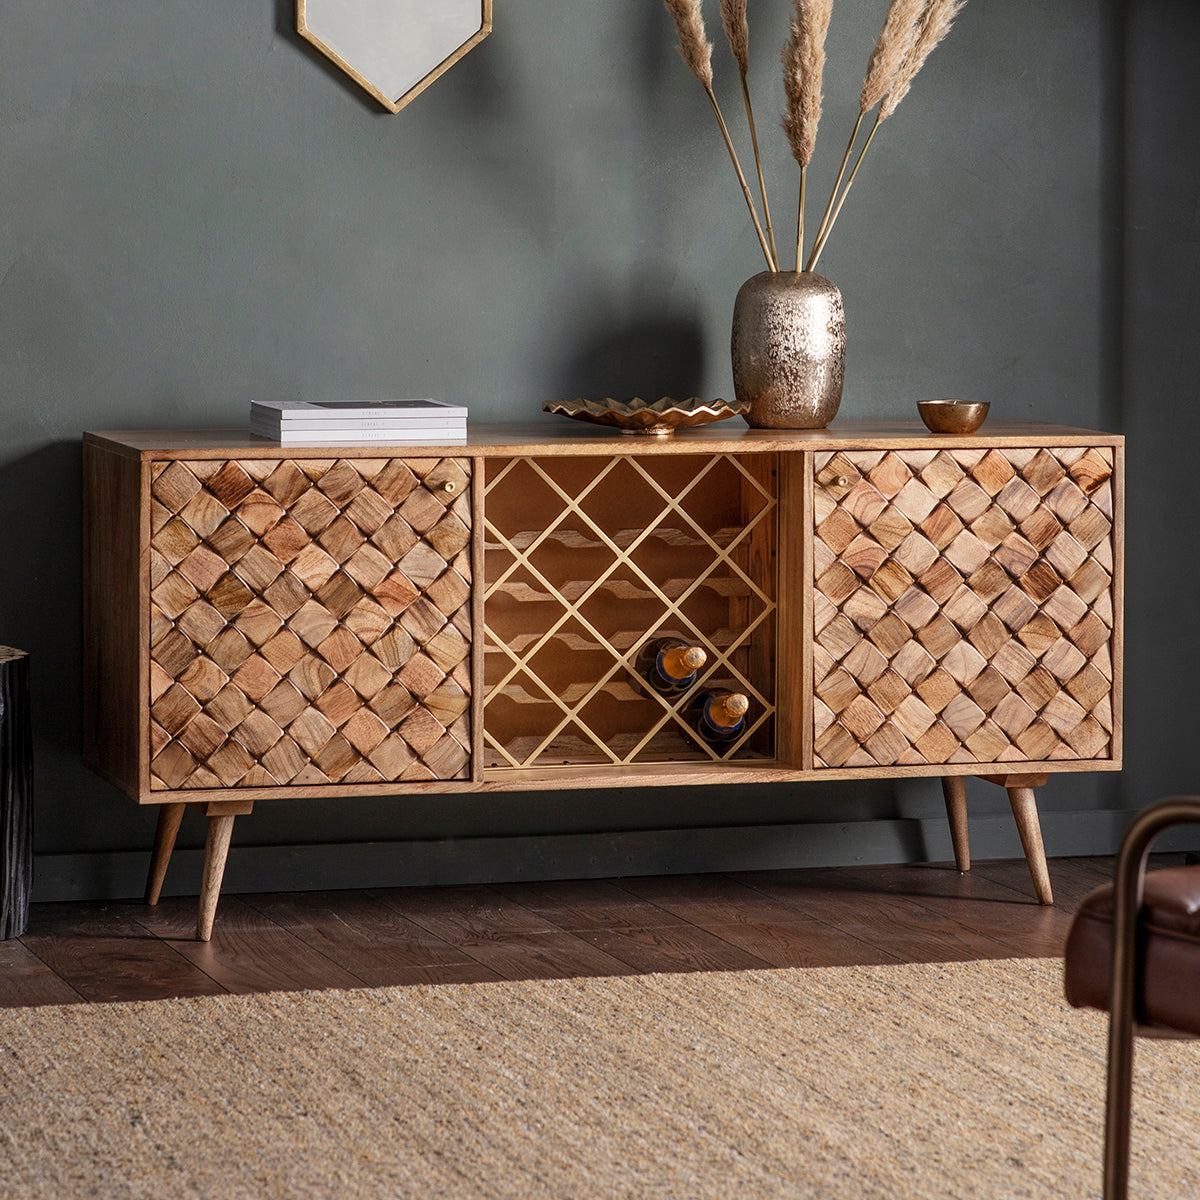 A Tuscany Wine Sideboard Burnt Wax with woven baskets, perfect for interior decor.